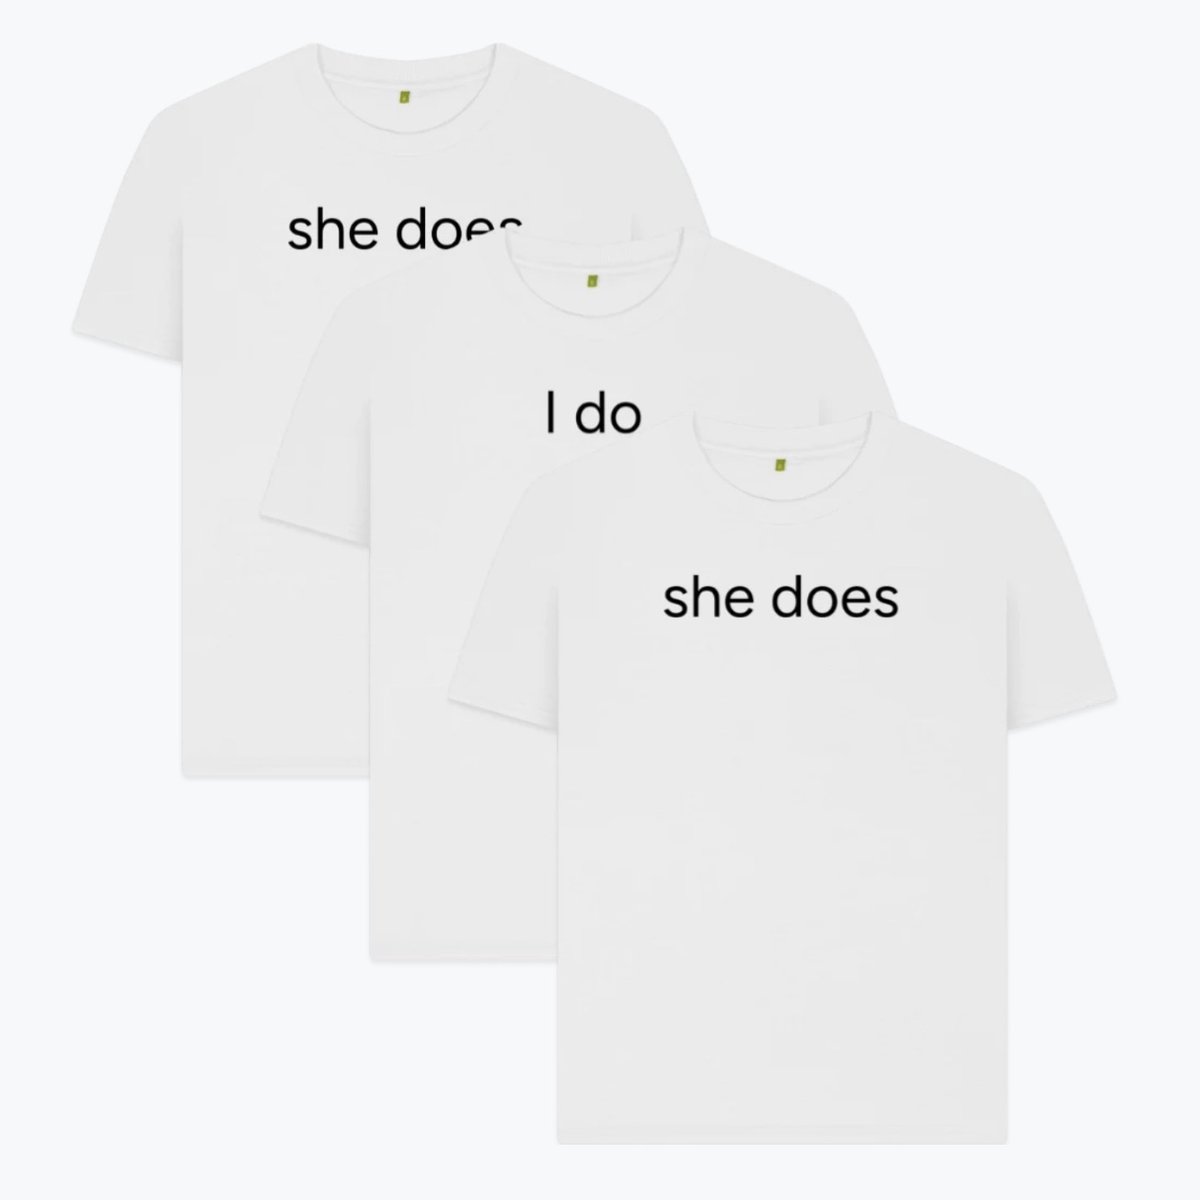 Did someone you know get engaged over the festive/New Year period? 👰‍♀️ Are you organising a hen party? 🥂 The I Do and She Does t-shirts are perfect. Available in whatever quantity is required!
allaboutthewords.uk/product/bridal/
#Bride #bridesmaid #henparty #engagement #tshirtdesign